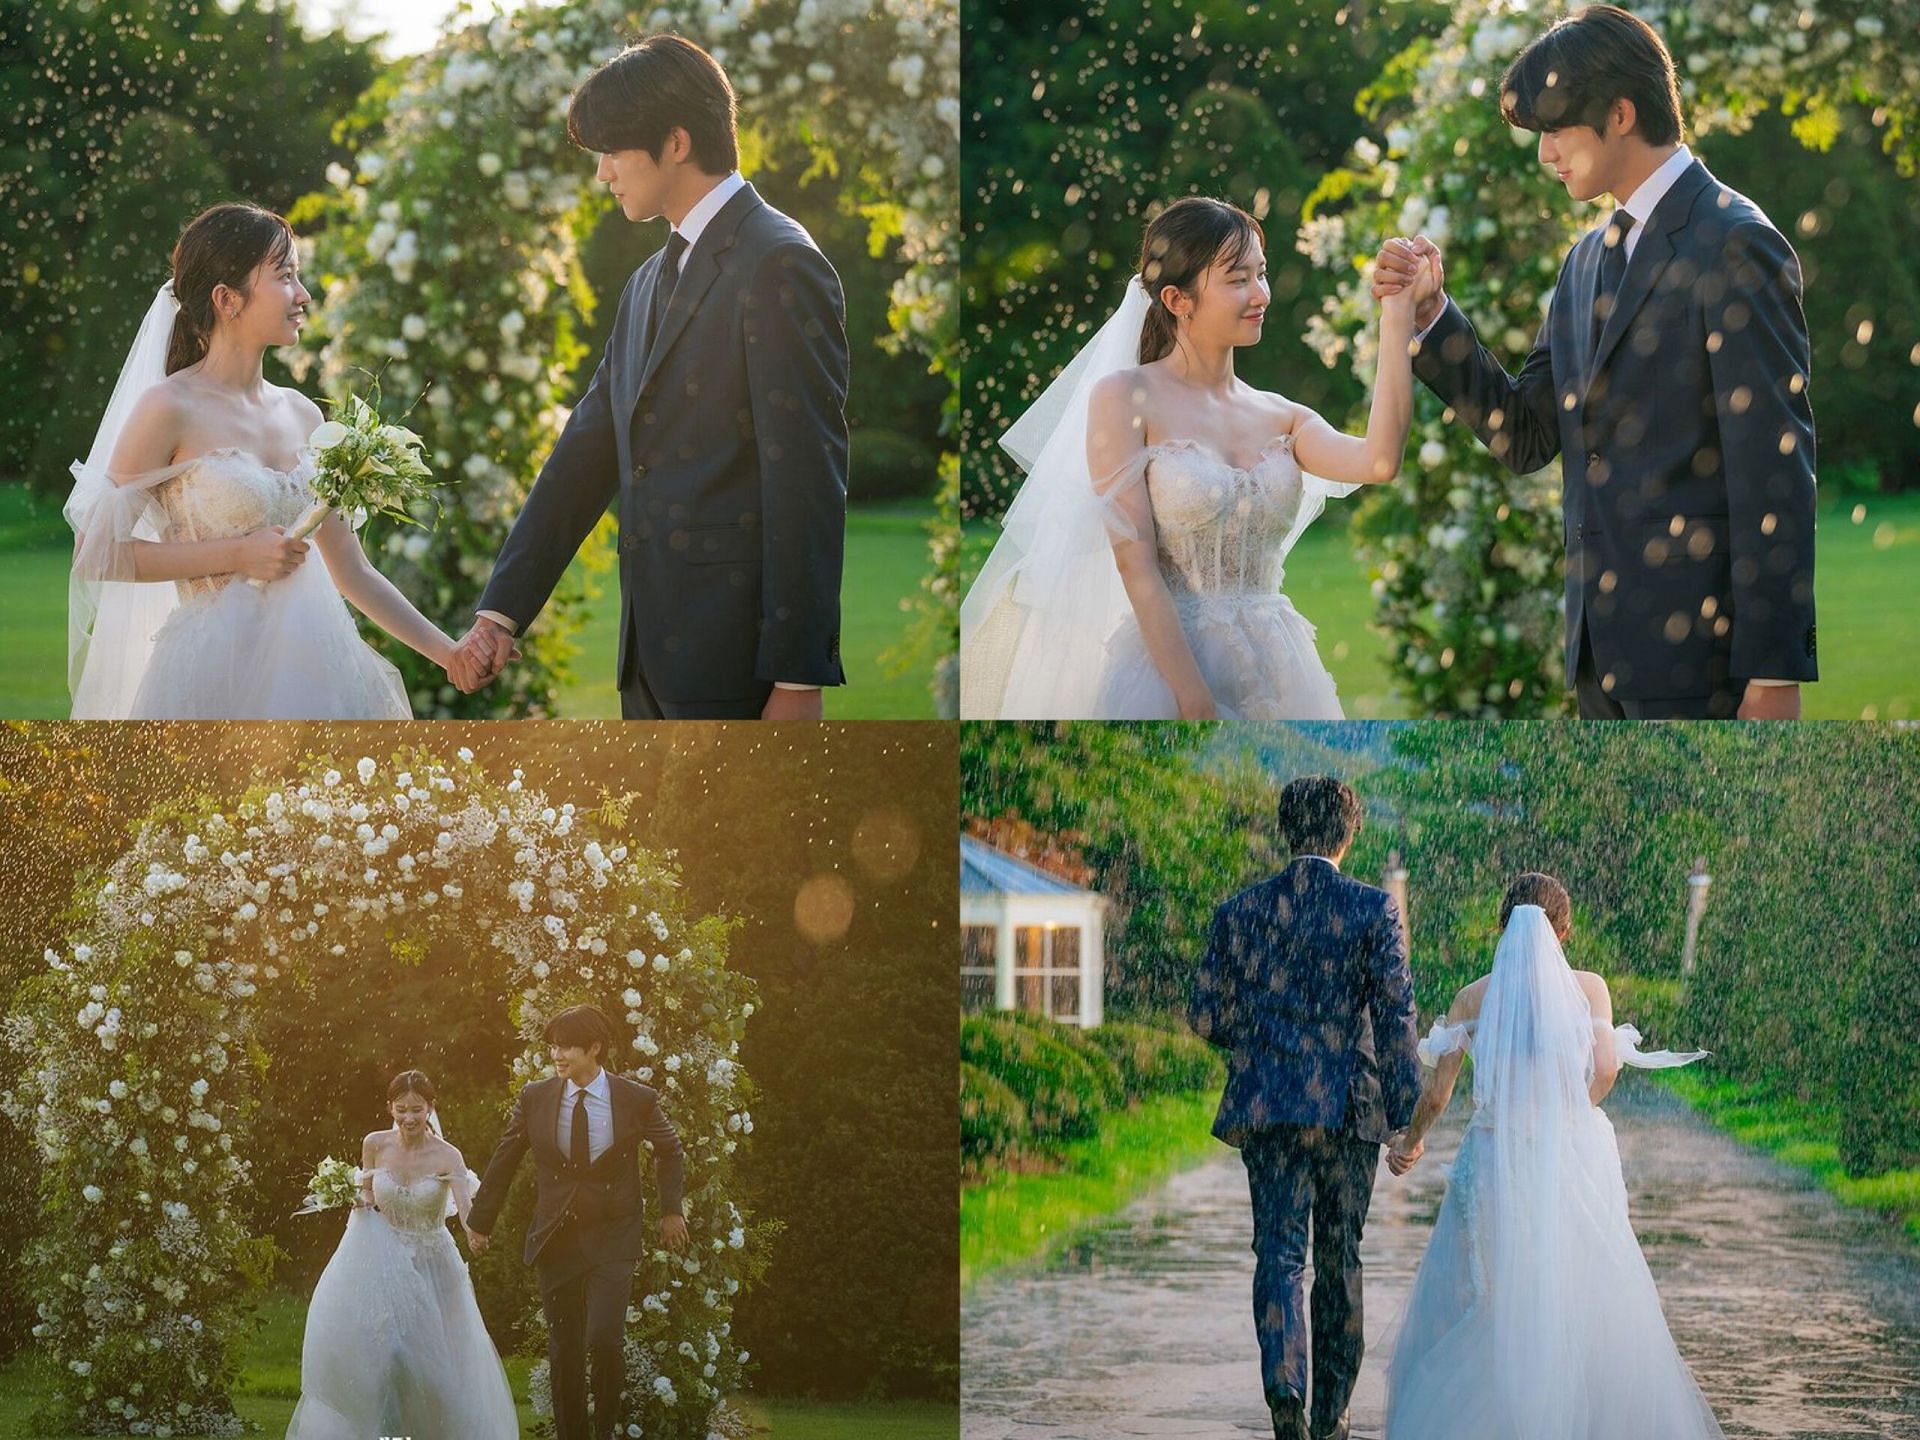 Wedding Impossible: Ending explained and season 2 renewal possibilities explored (Image via tvN/Instagram)